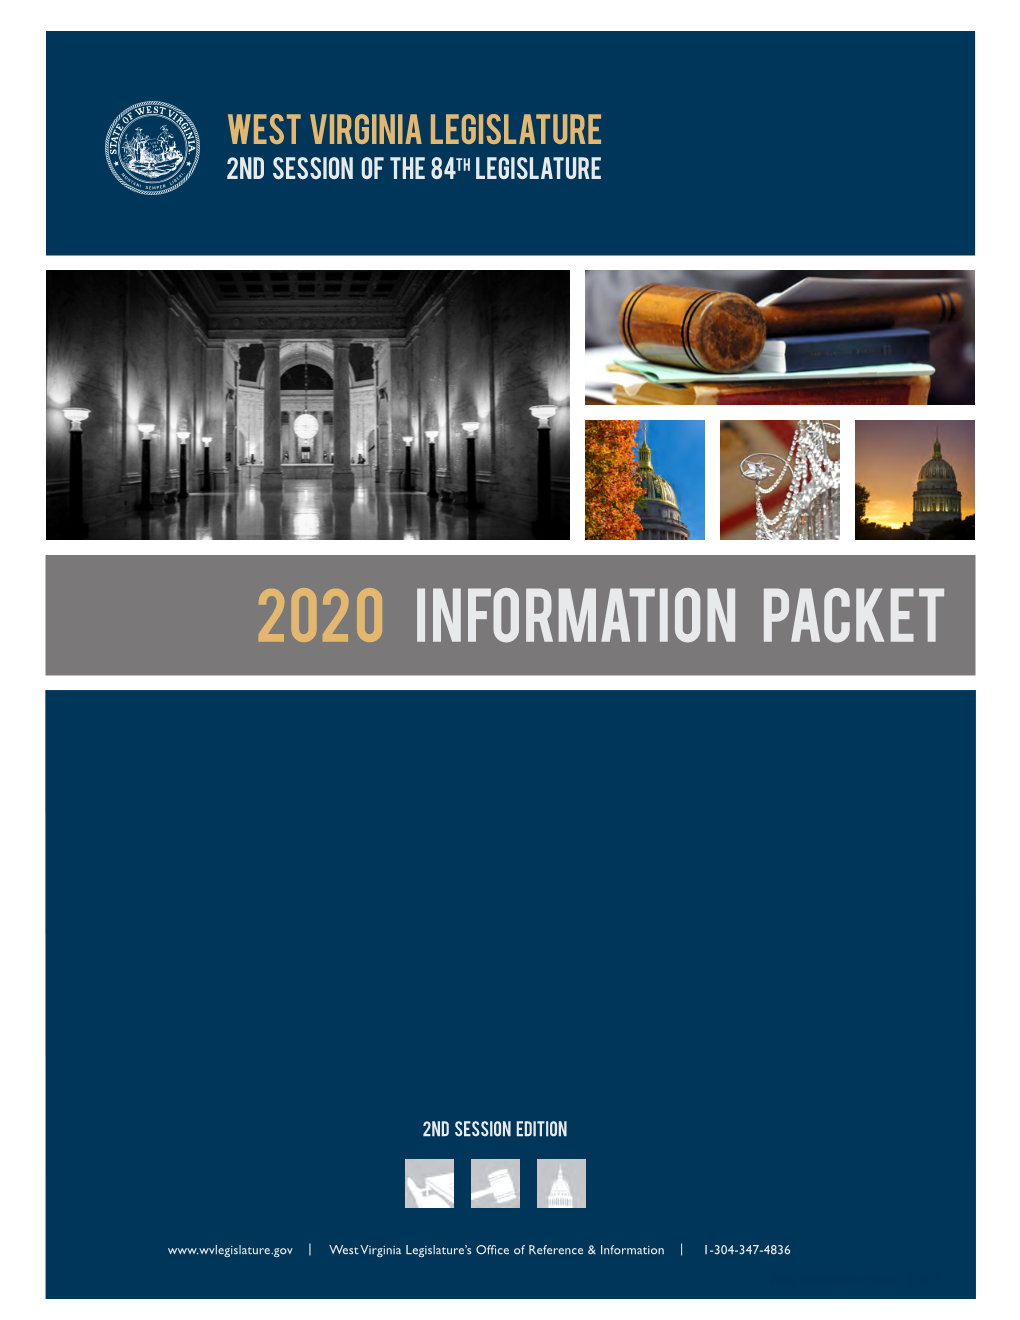 2020 Information Packet